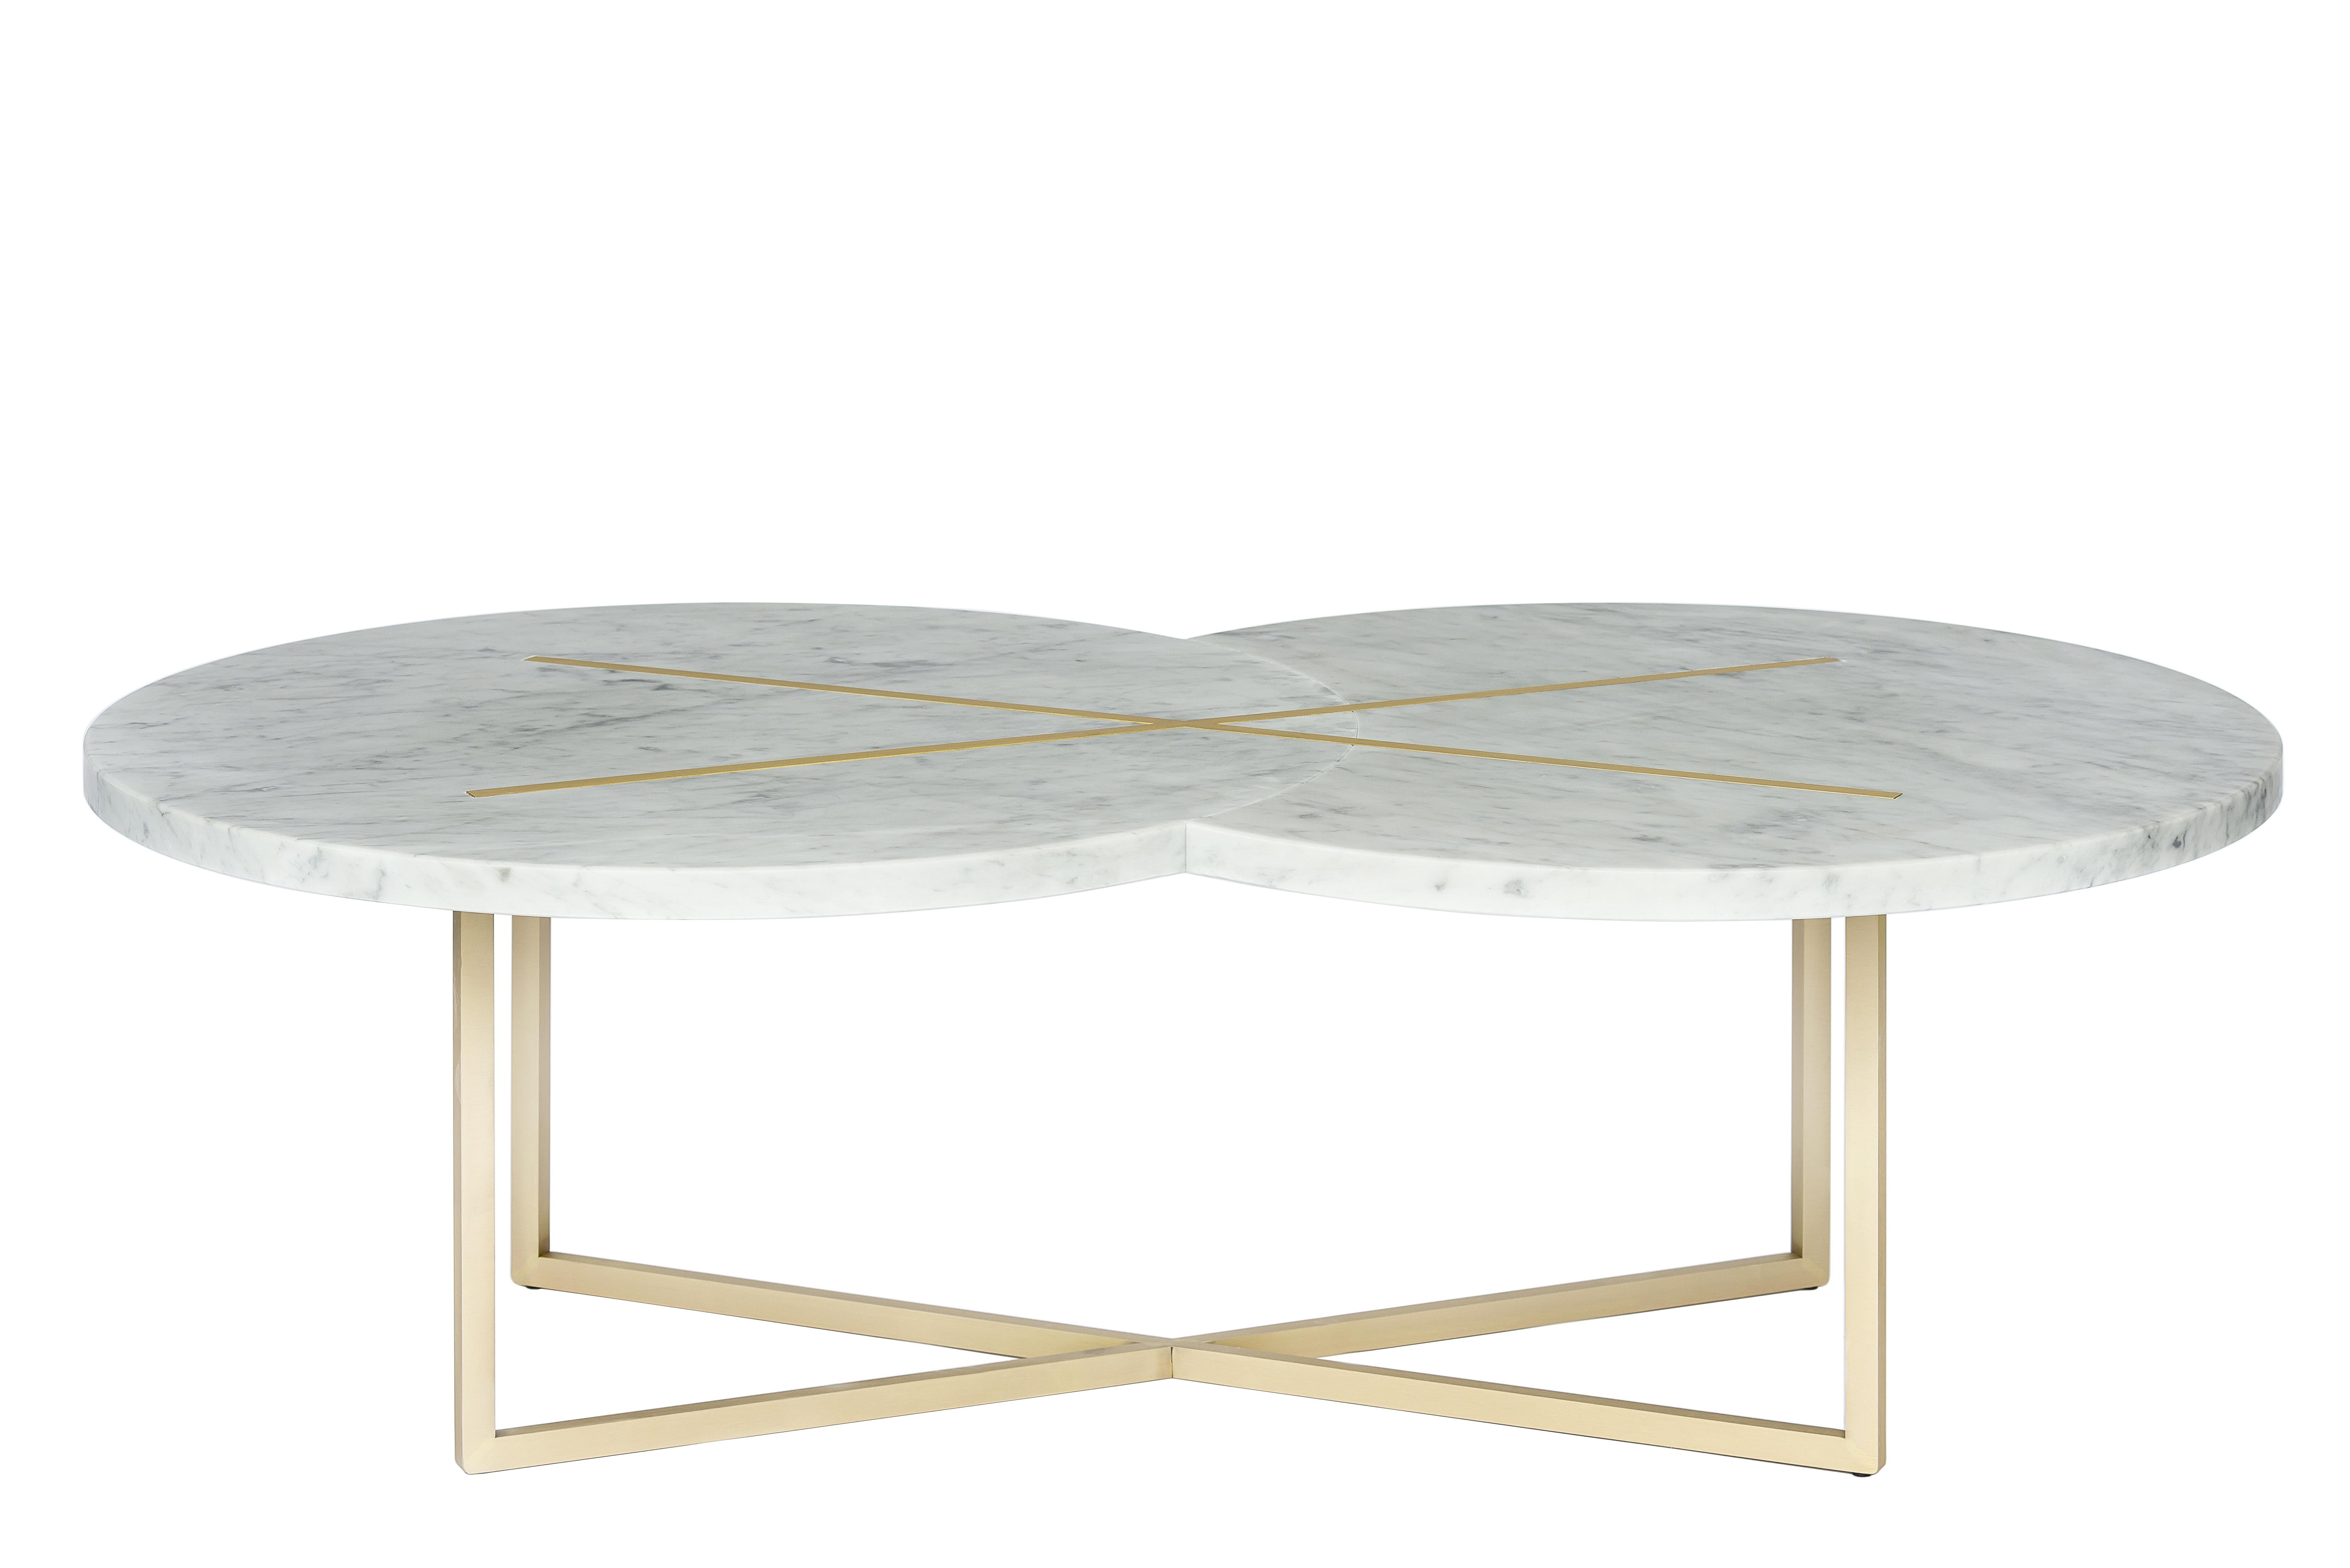 Eclipse X coffee table by Hagit Pincovici.
Dimensions: 130 L x 76 W x 40 H
Materials: Carrara marble, brass

Hagit Pincovici founded her eponymous bespoke luxury furniture and lighting atelier in 2014. Known in her earlier work for a rich color